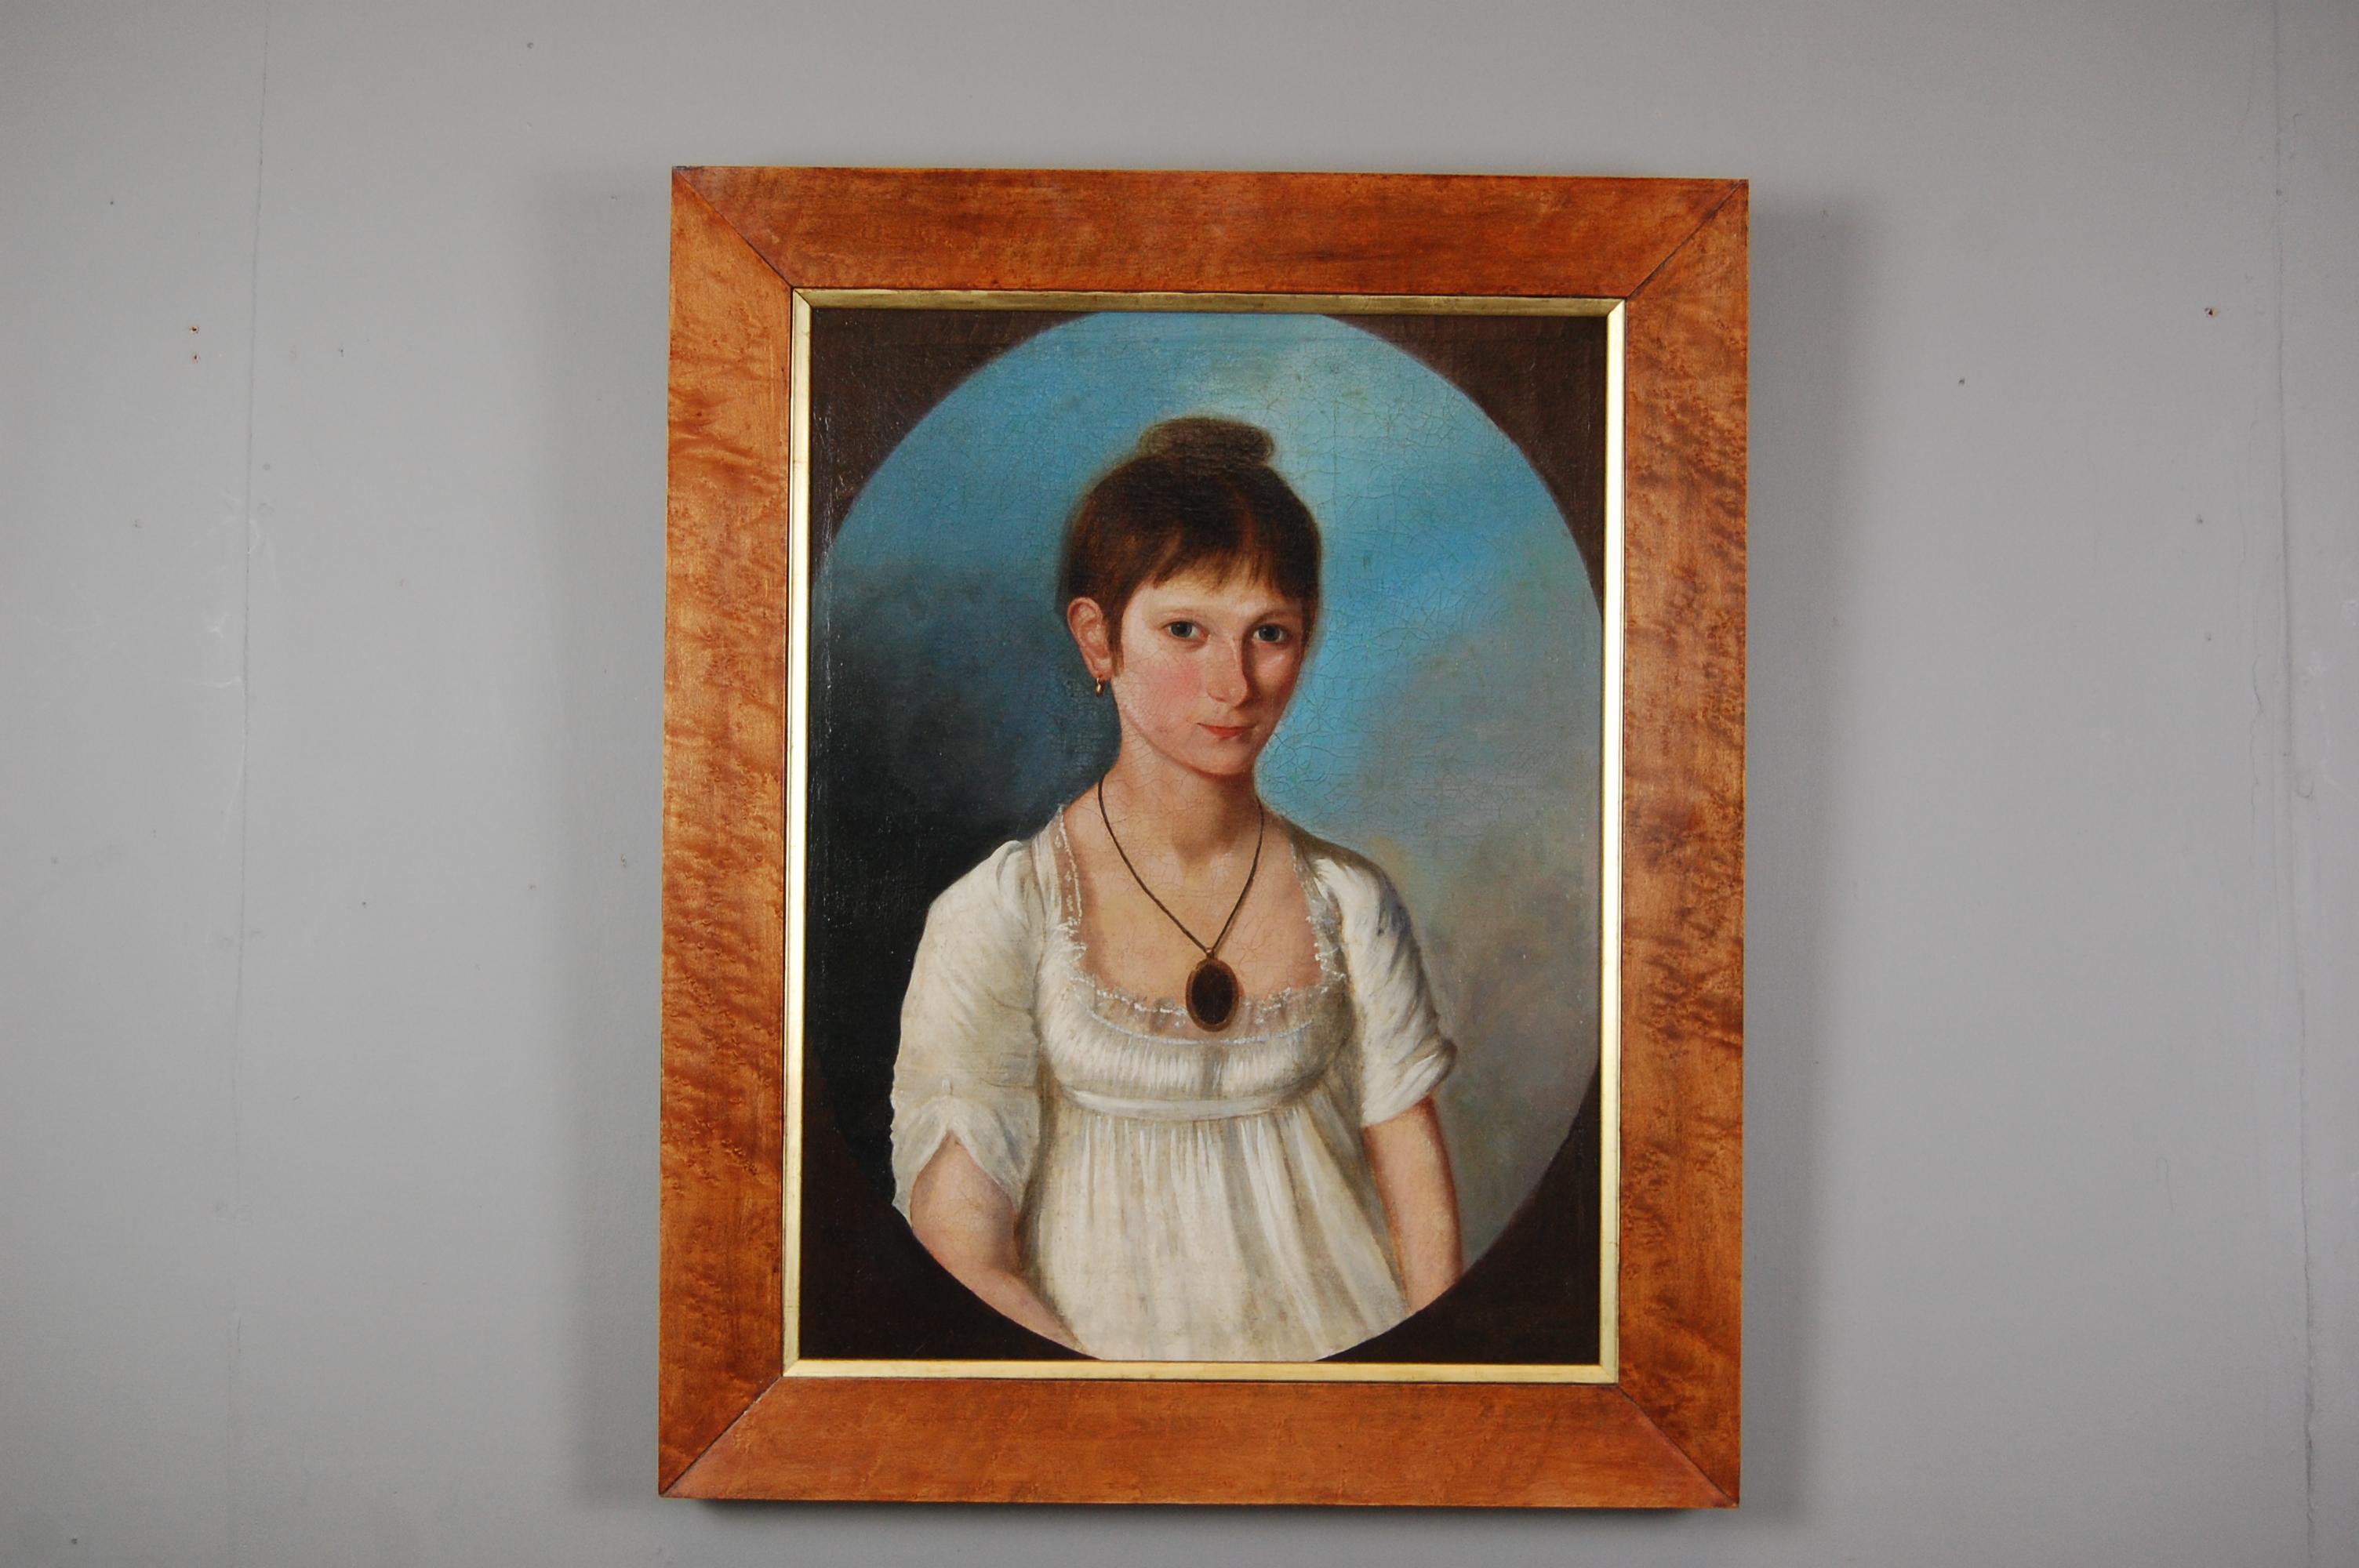 Portrait of Ann Dorr 1806.
A Portrait of Ann Dorr 1783-1840, of Barrowby, Lincolnshire. English school, first decade 19th century, oil on canvas. Dated 1806 with indistinct signature visible under a raking light of B Slea?
A charming portrayal of